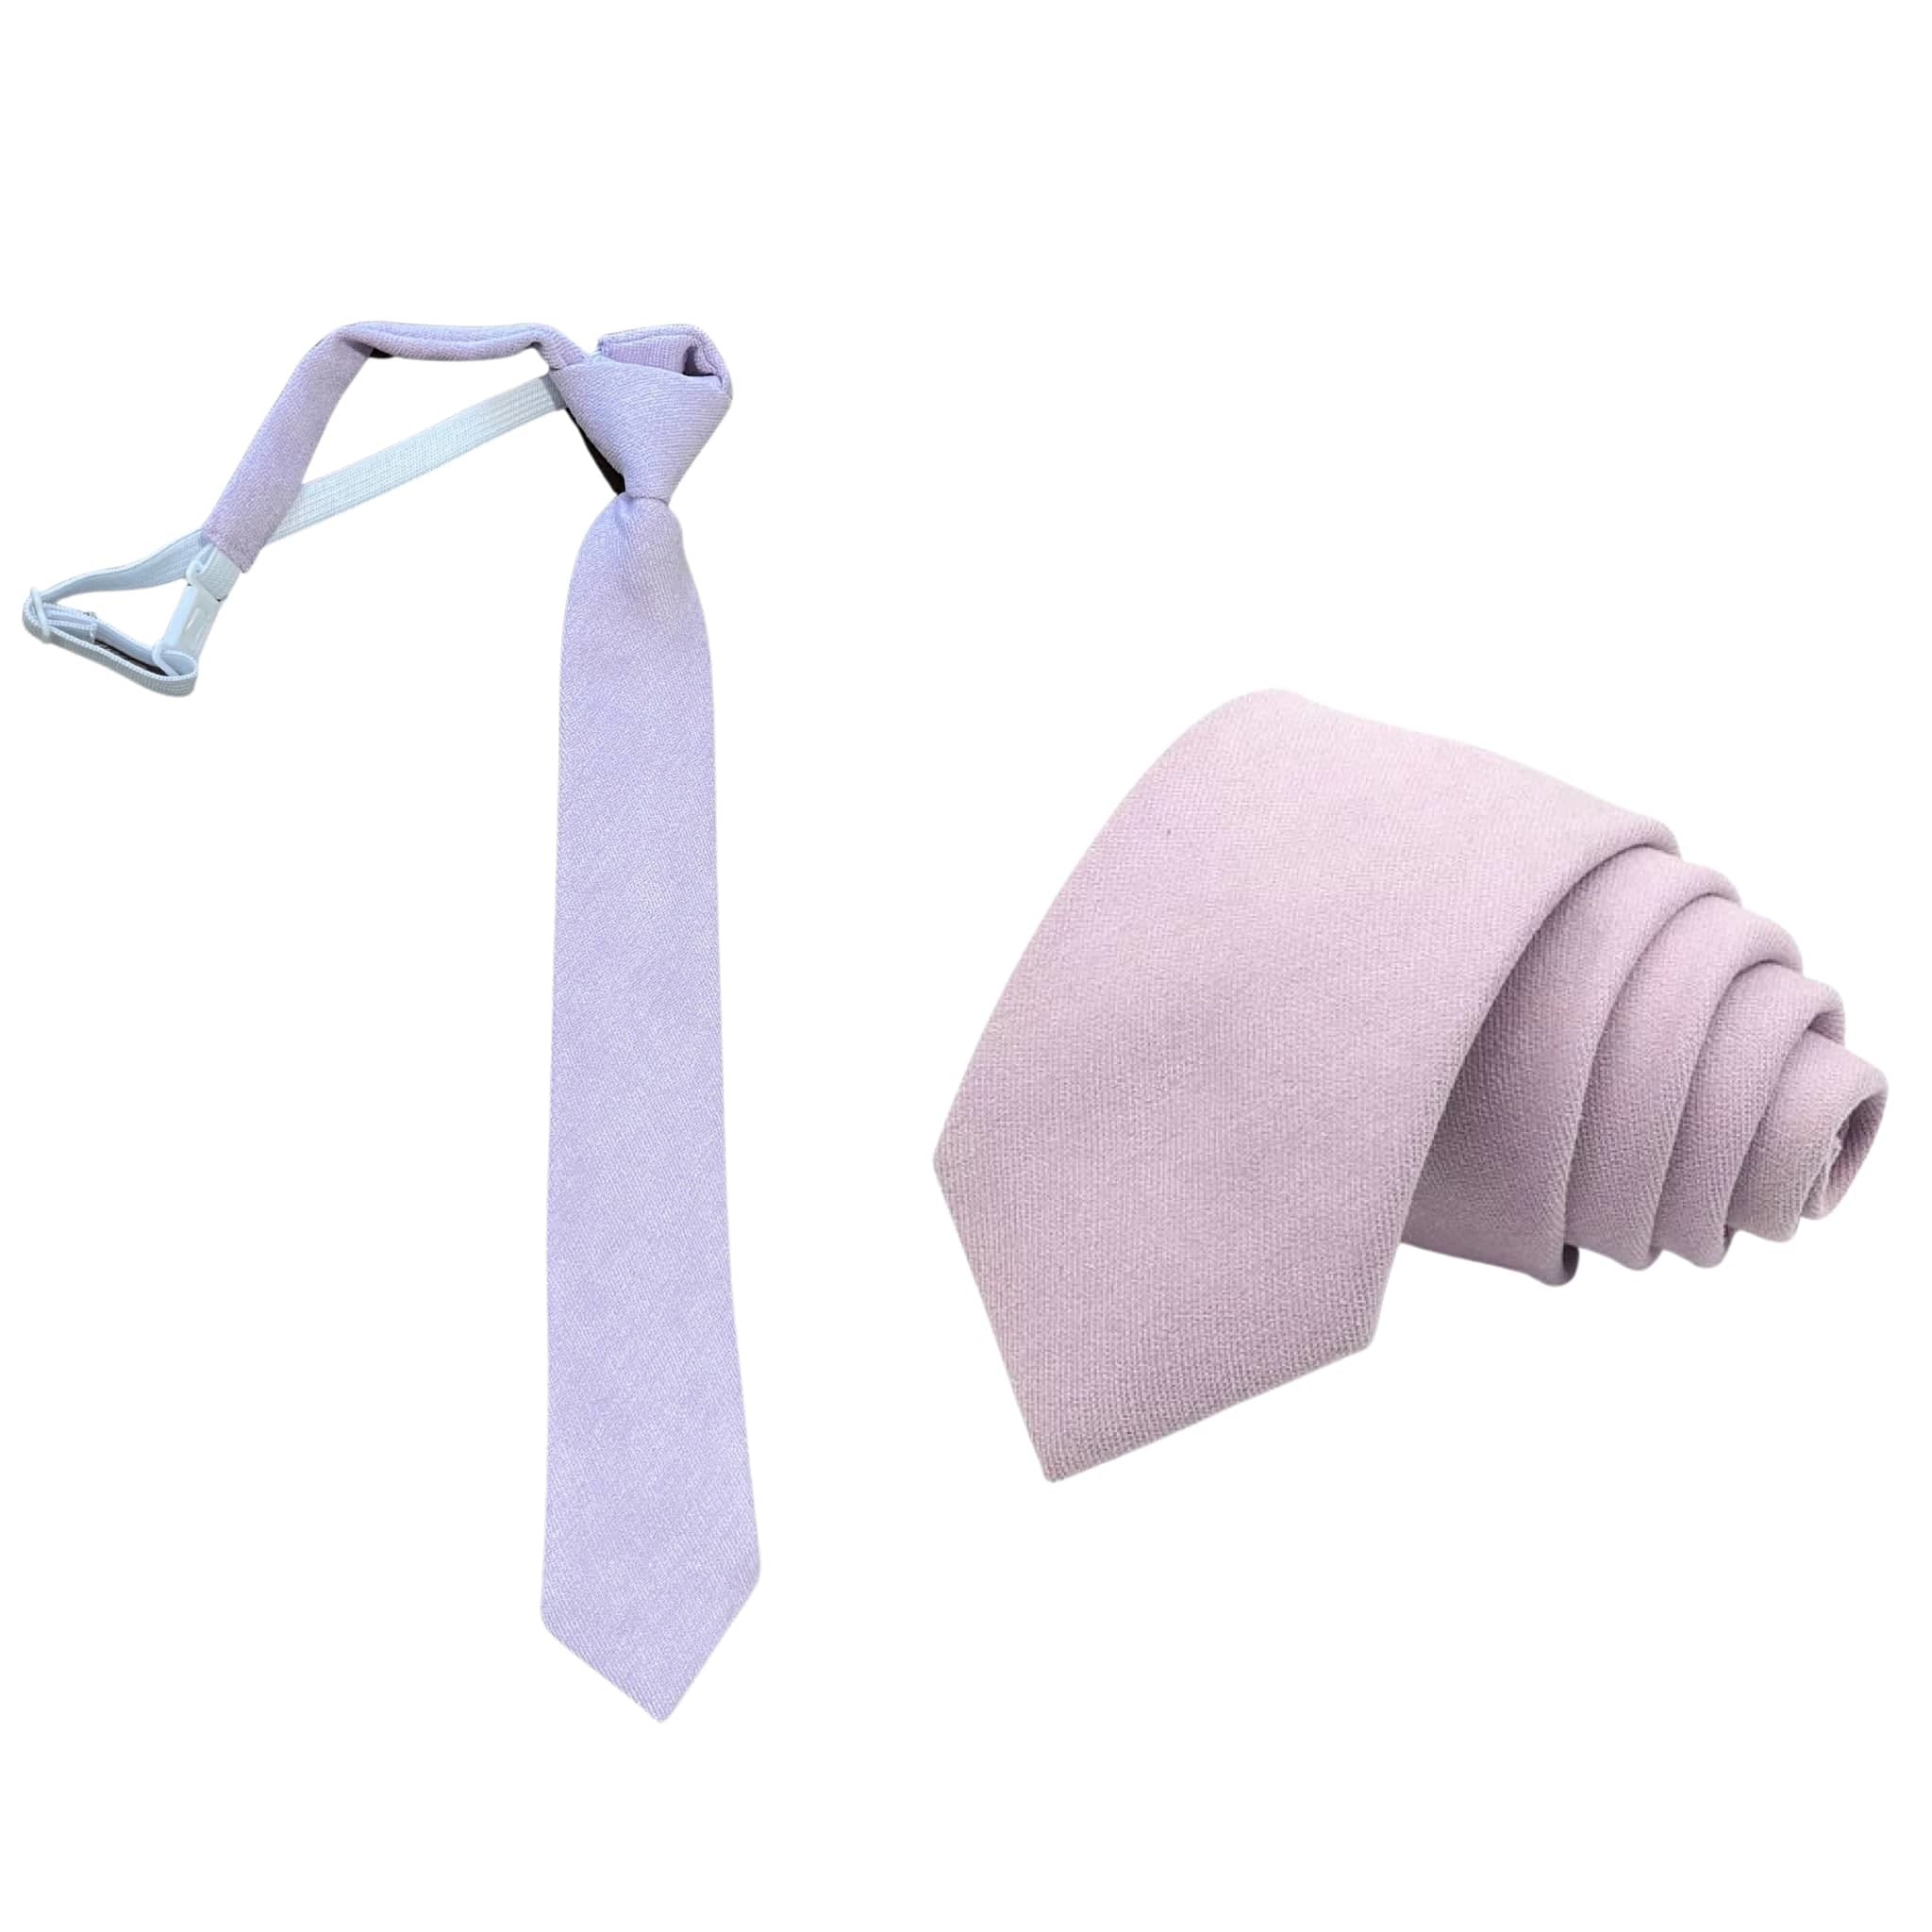 Purple Boys Floral Clip On Tie 2.3 for kids toddler child Mytieshop - REMI-Purple Boys Floral Clip On Tie Material: Suede Color: Purple Approx Size: Max width: 6.5 cm / 2.36 inches Length: 37 Cm / 14.56 Inches Have your little one looking sharp with this REMI Purple Kids and Toddlers Floral Clip On Tie. This tie is specifically designed for children ages 3-8. It&#39;s made with 100% suede and is 2.3&quot; wide. The beautiful purple color is perfect for any occasion, whether it&#39;s a wedding, family reunion